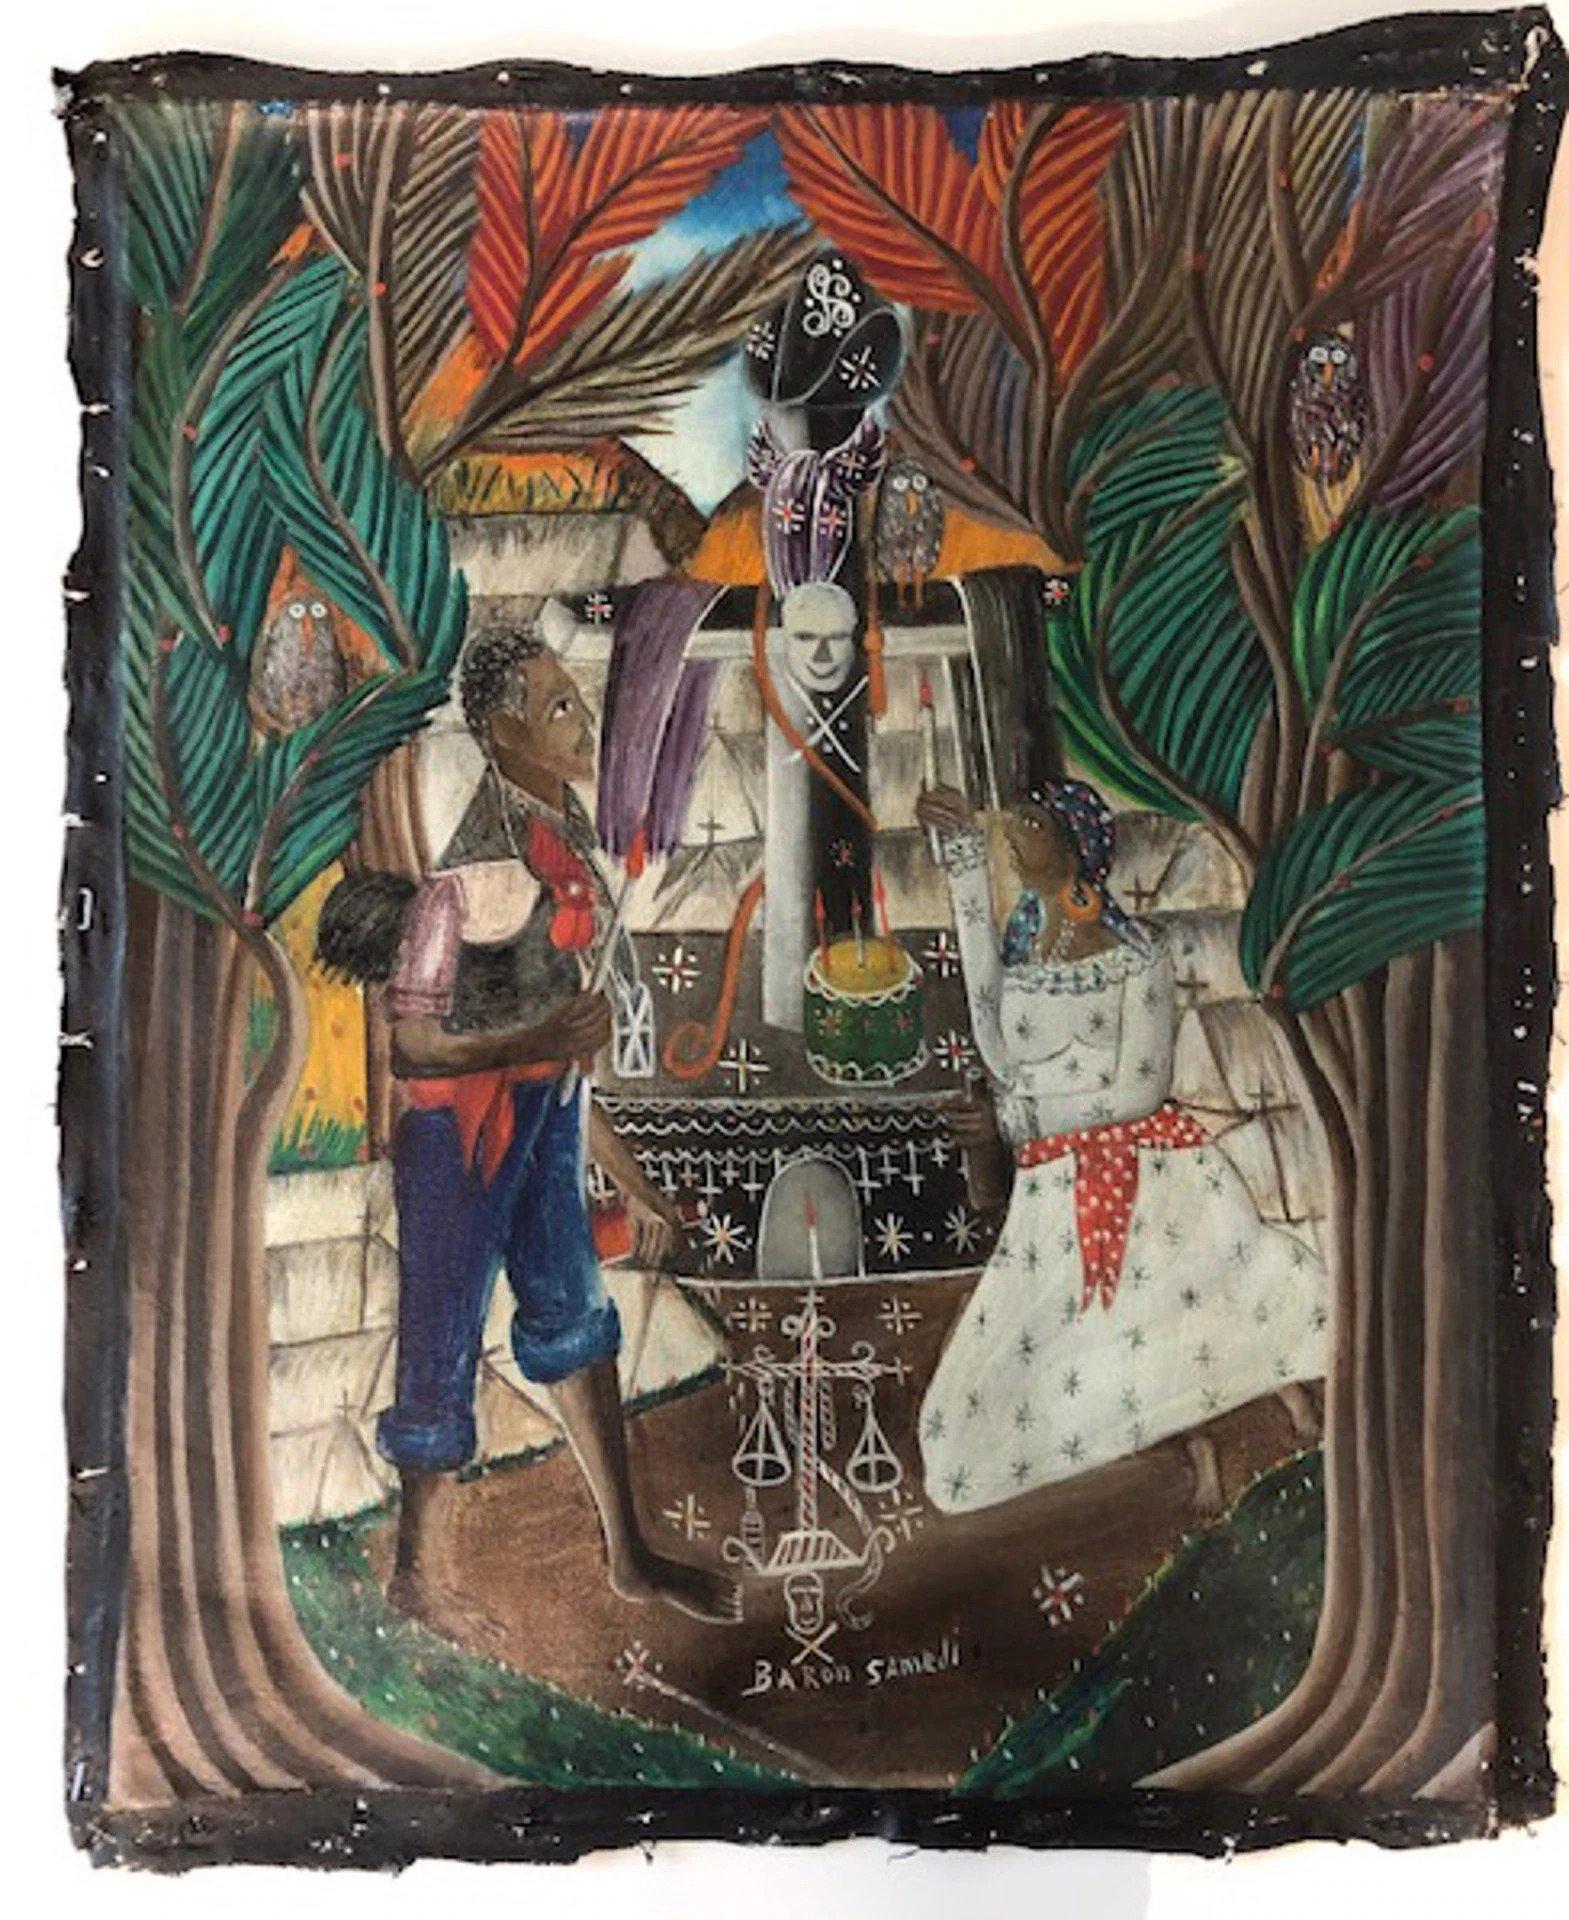 André Pierre Figurative Painting - Andre Pierre (Haitian, 1914-2005) "Baron Samedi in the Cemetery" Oil on Canvas